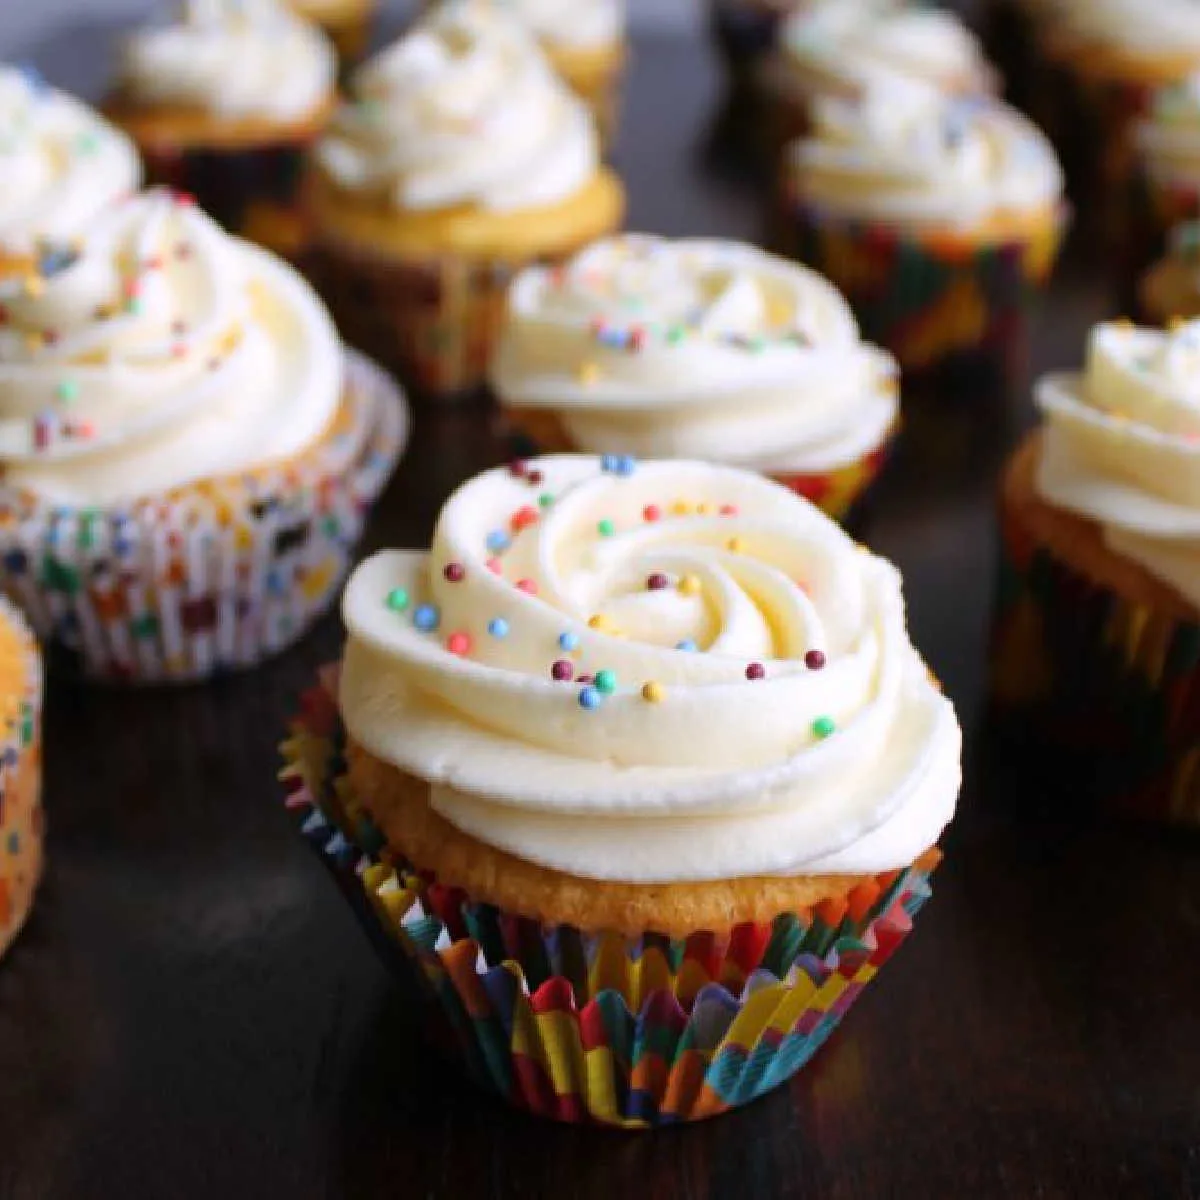 Cupcakes with vanilla russian buttercream piped on top finished with colorful sprinkles.